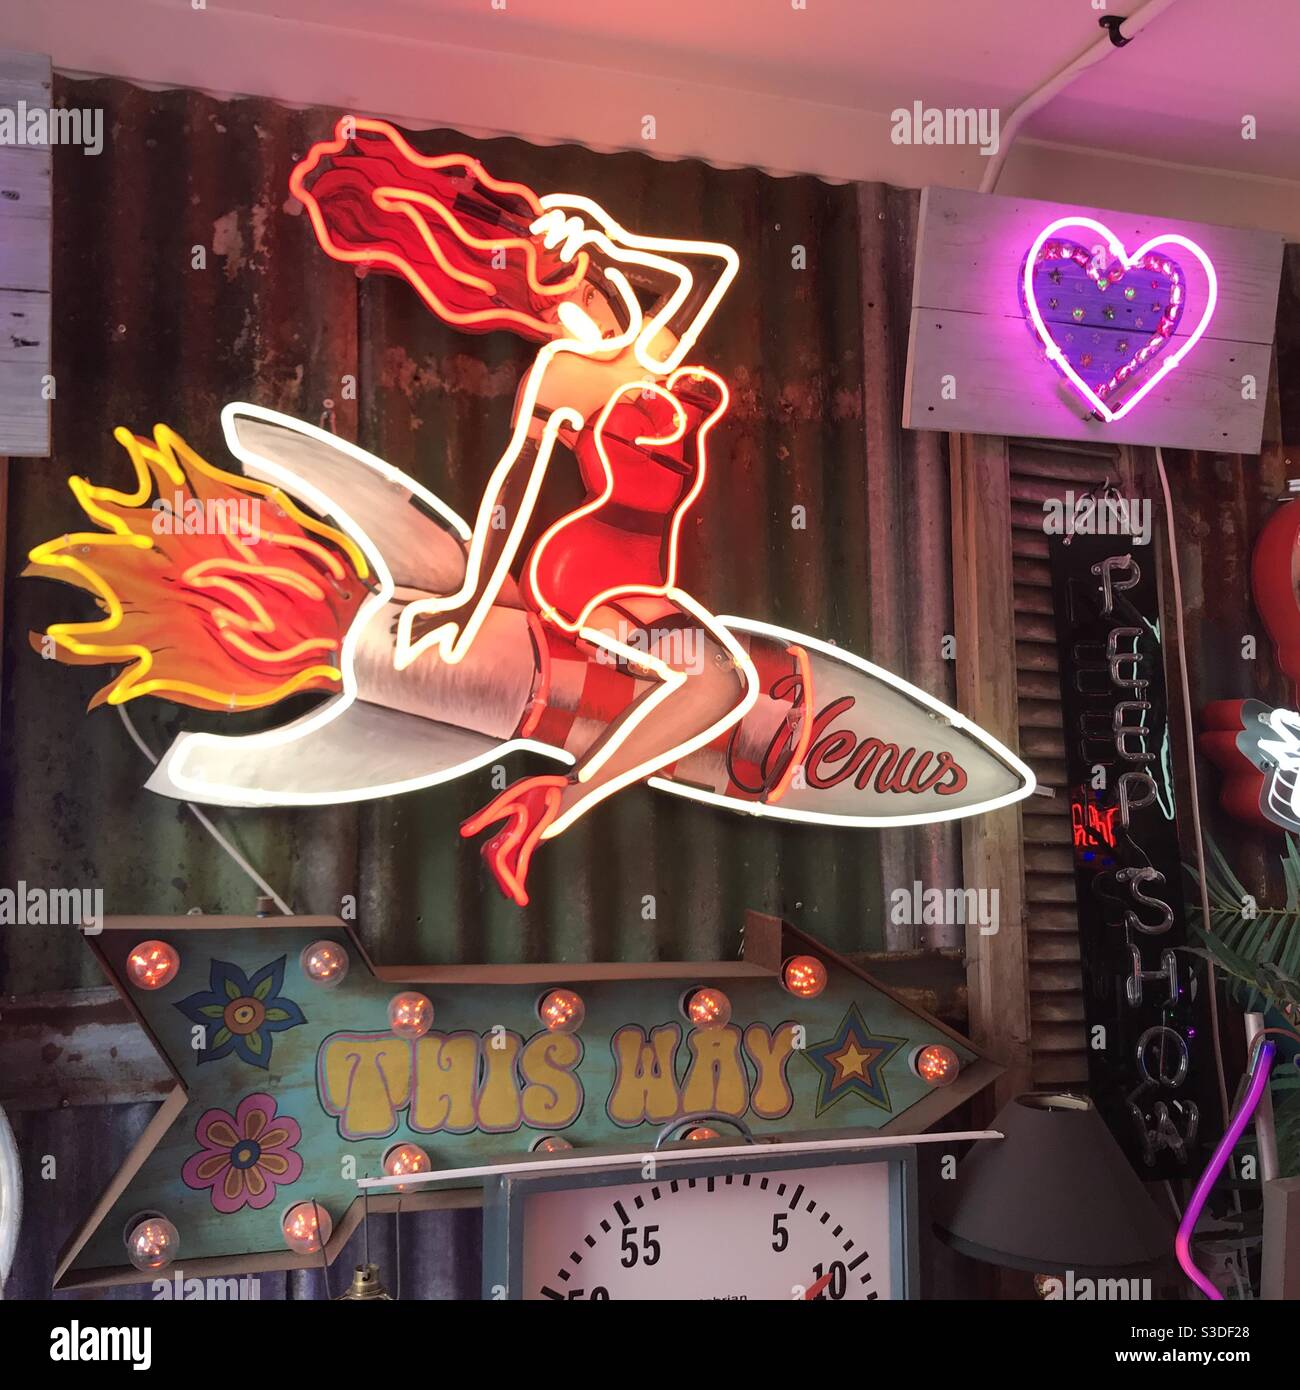 Burlesque lady on a rocket neon sign Stock Photo